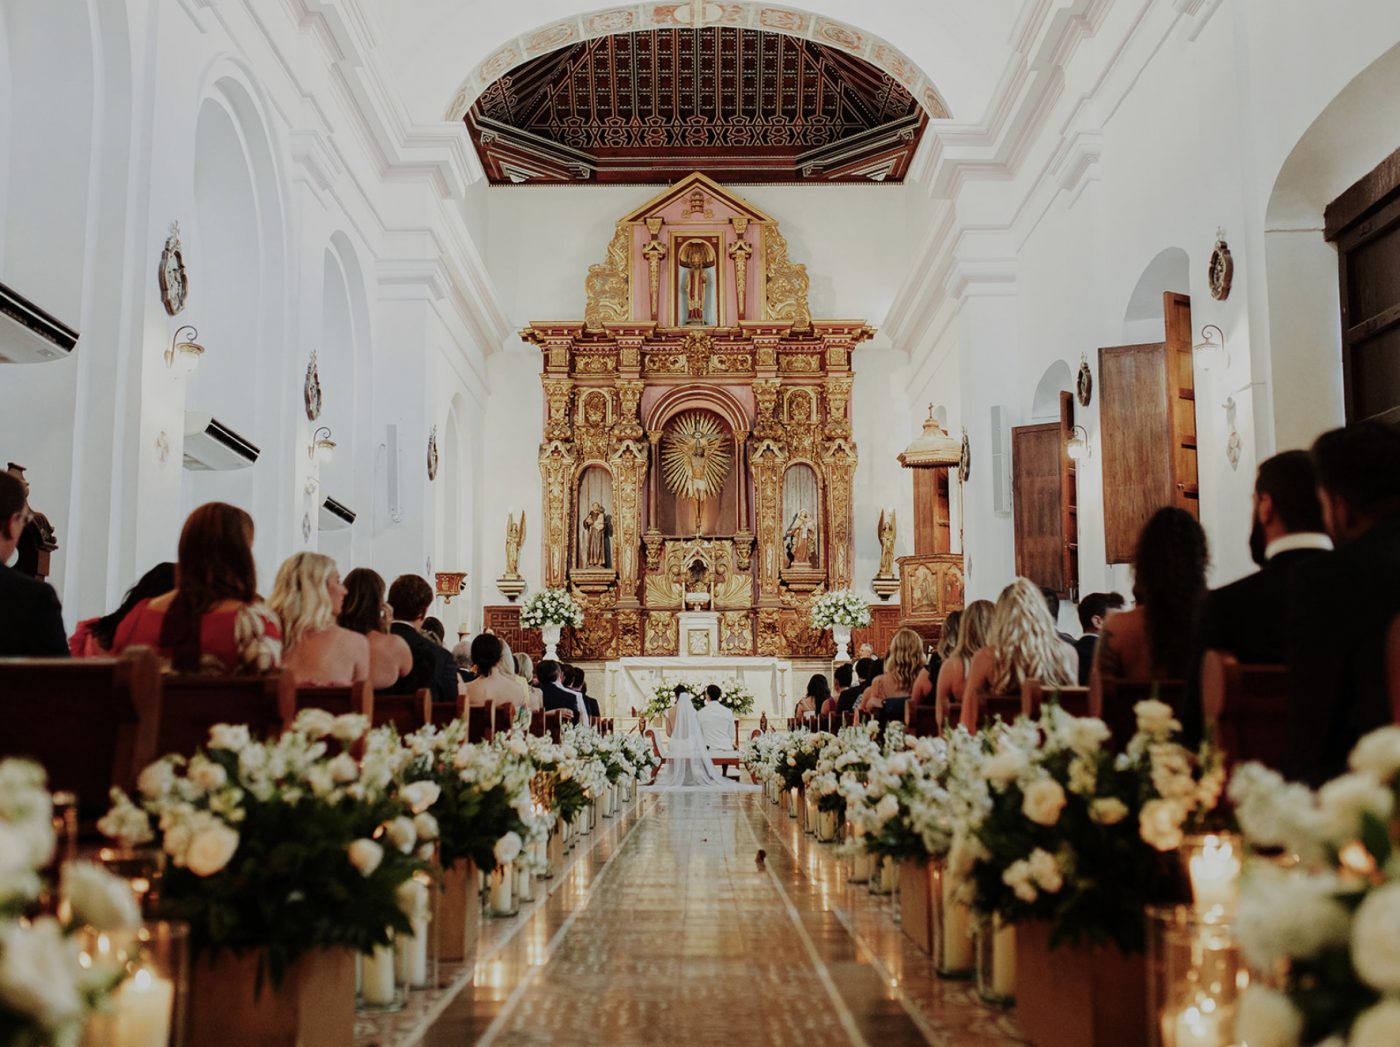 Getting Married in Cartagena